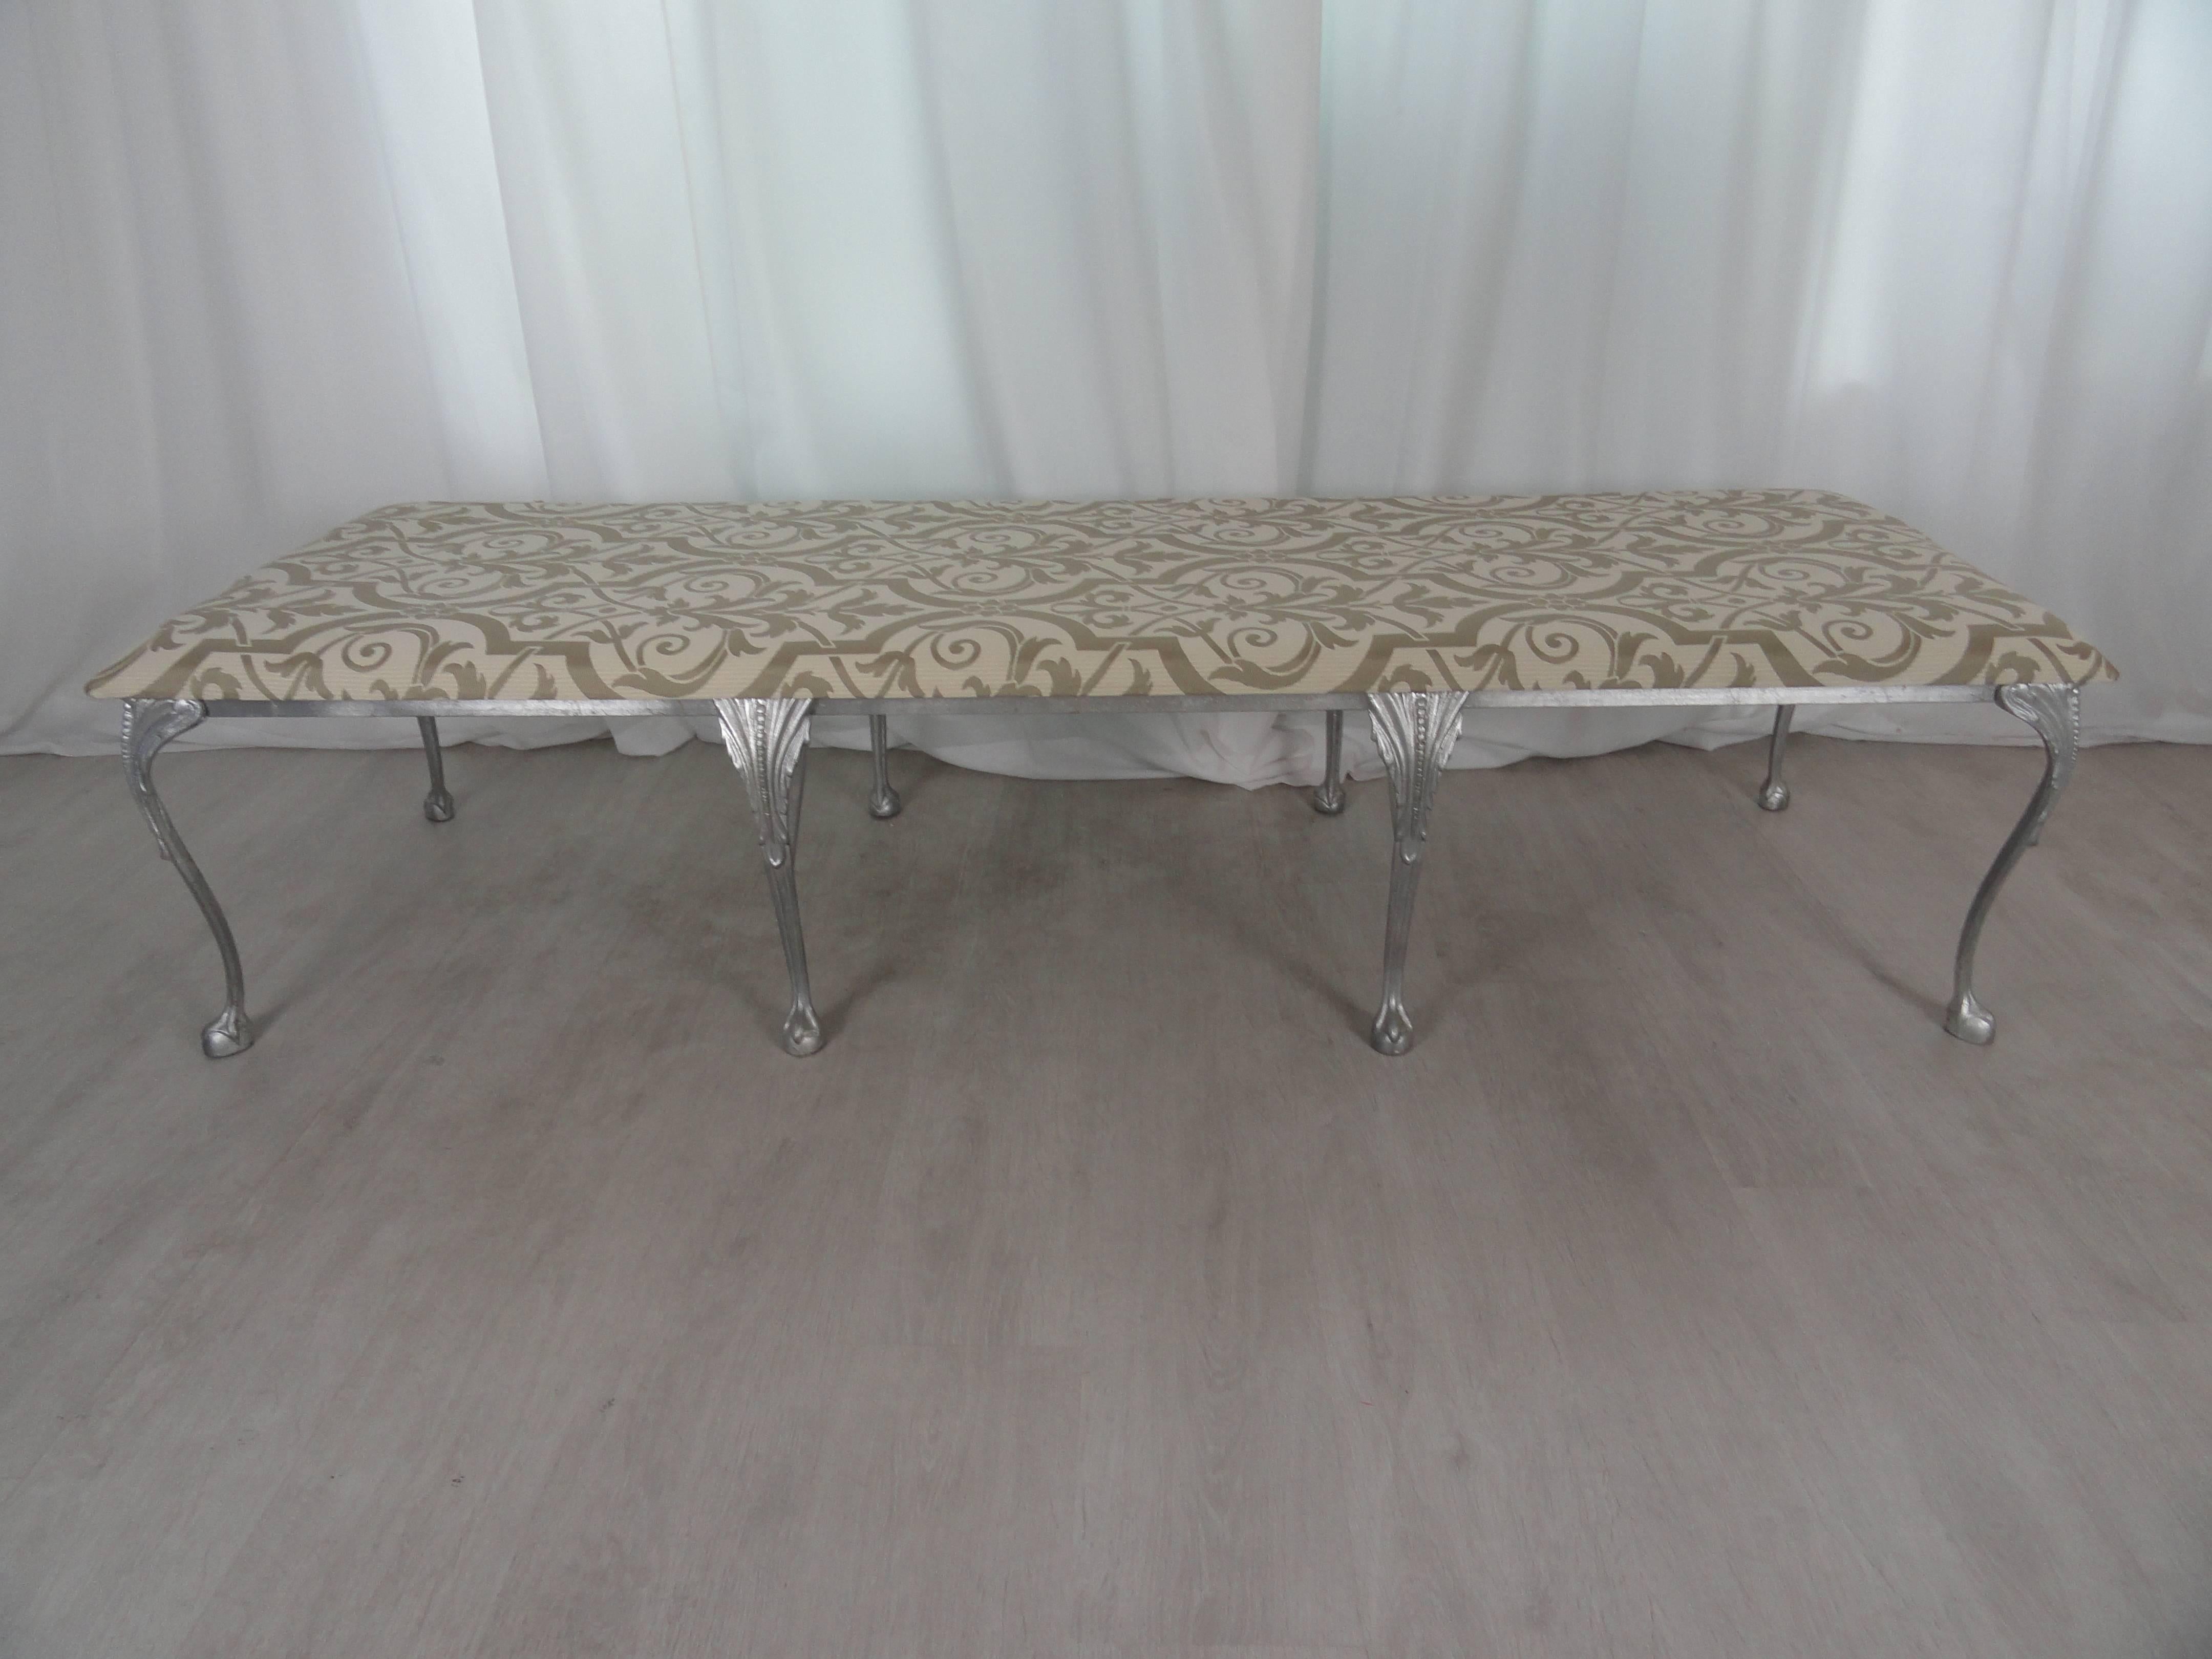 Neoclassical style metal and upholstered bench. Eight leg bench with ball and claw legs in silver finish. Upholstered in contemporary damask. Large-scale.